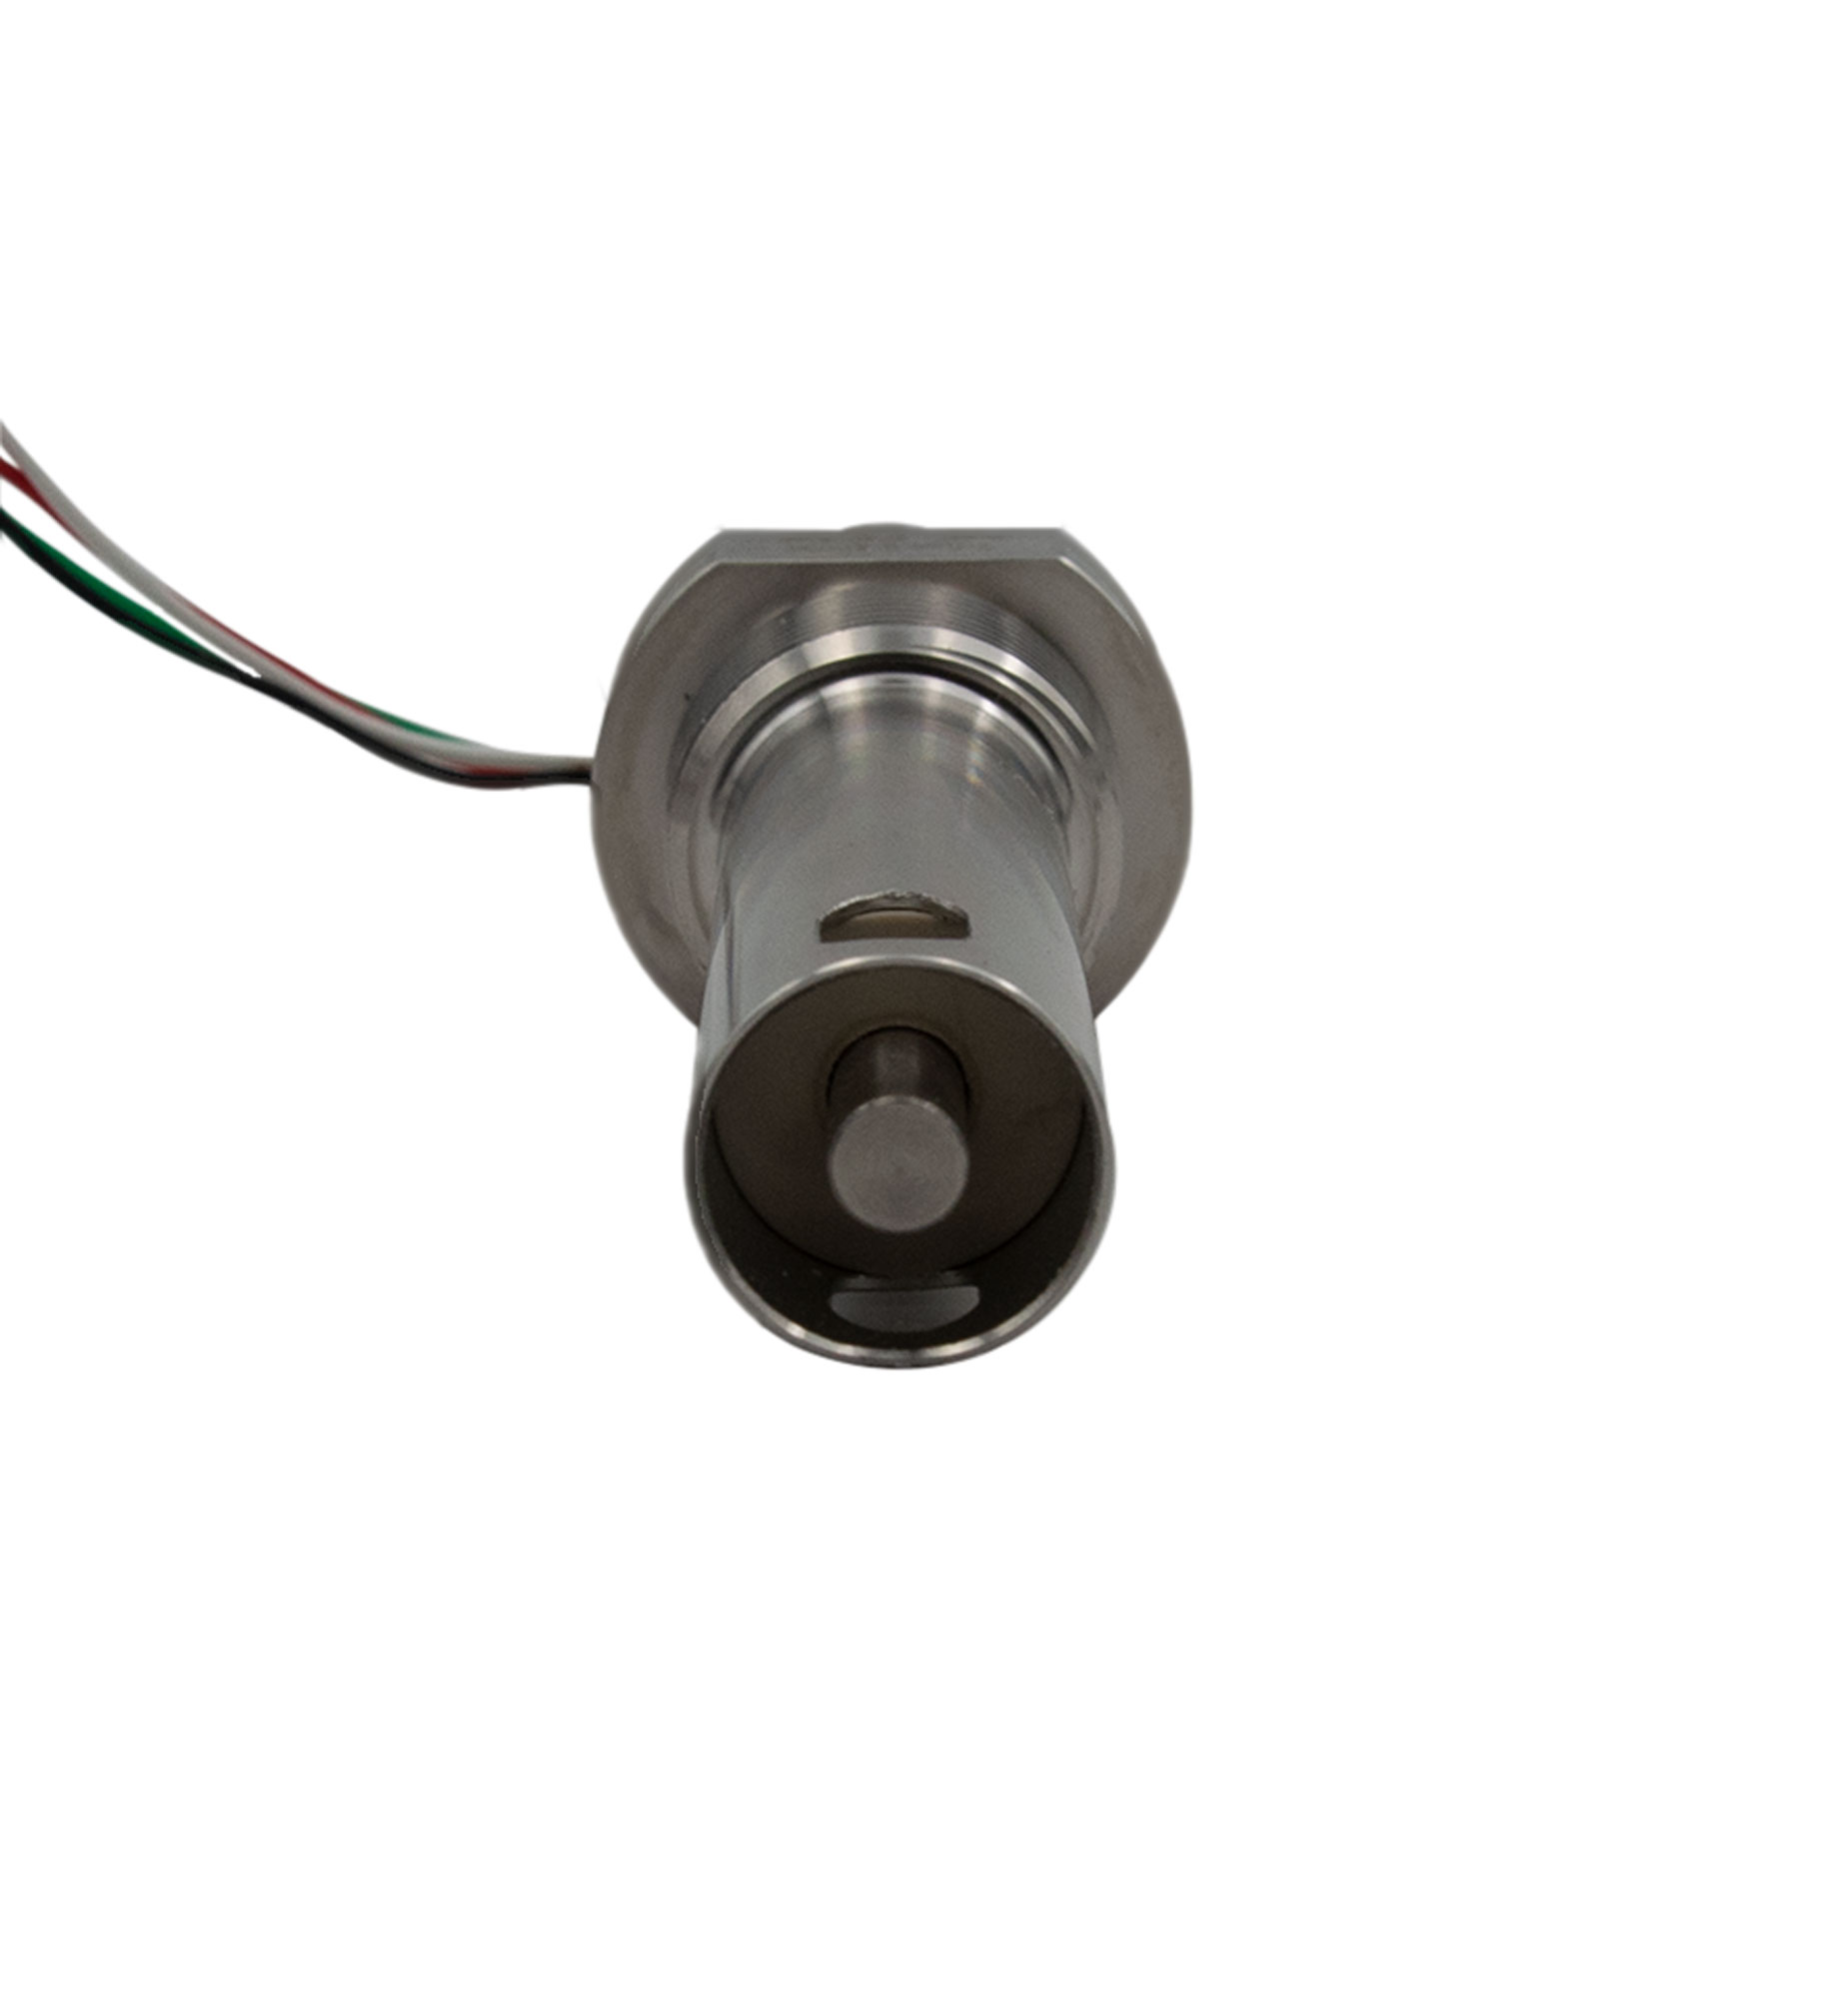 Select stainless steel conductivity sensor 200°C (max. 17 bar) long version for 1 inch T-piece (HTLF EXT)